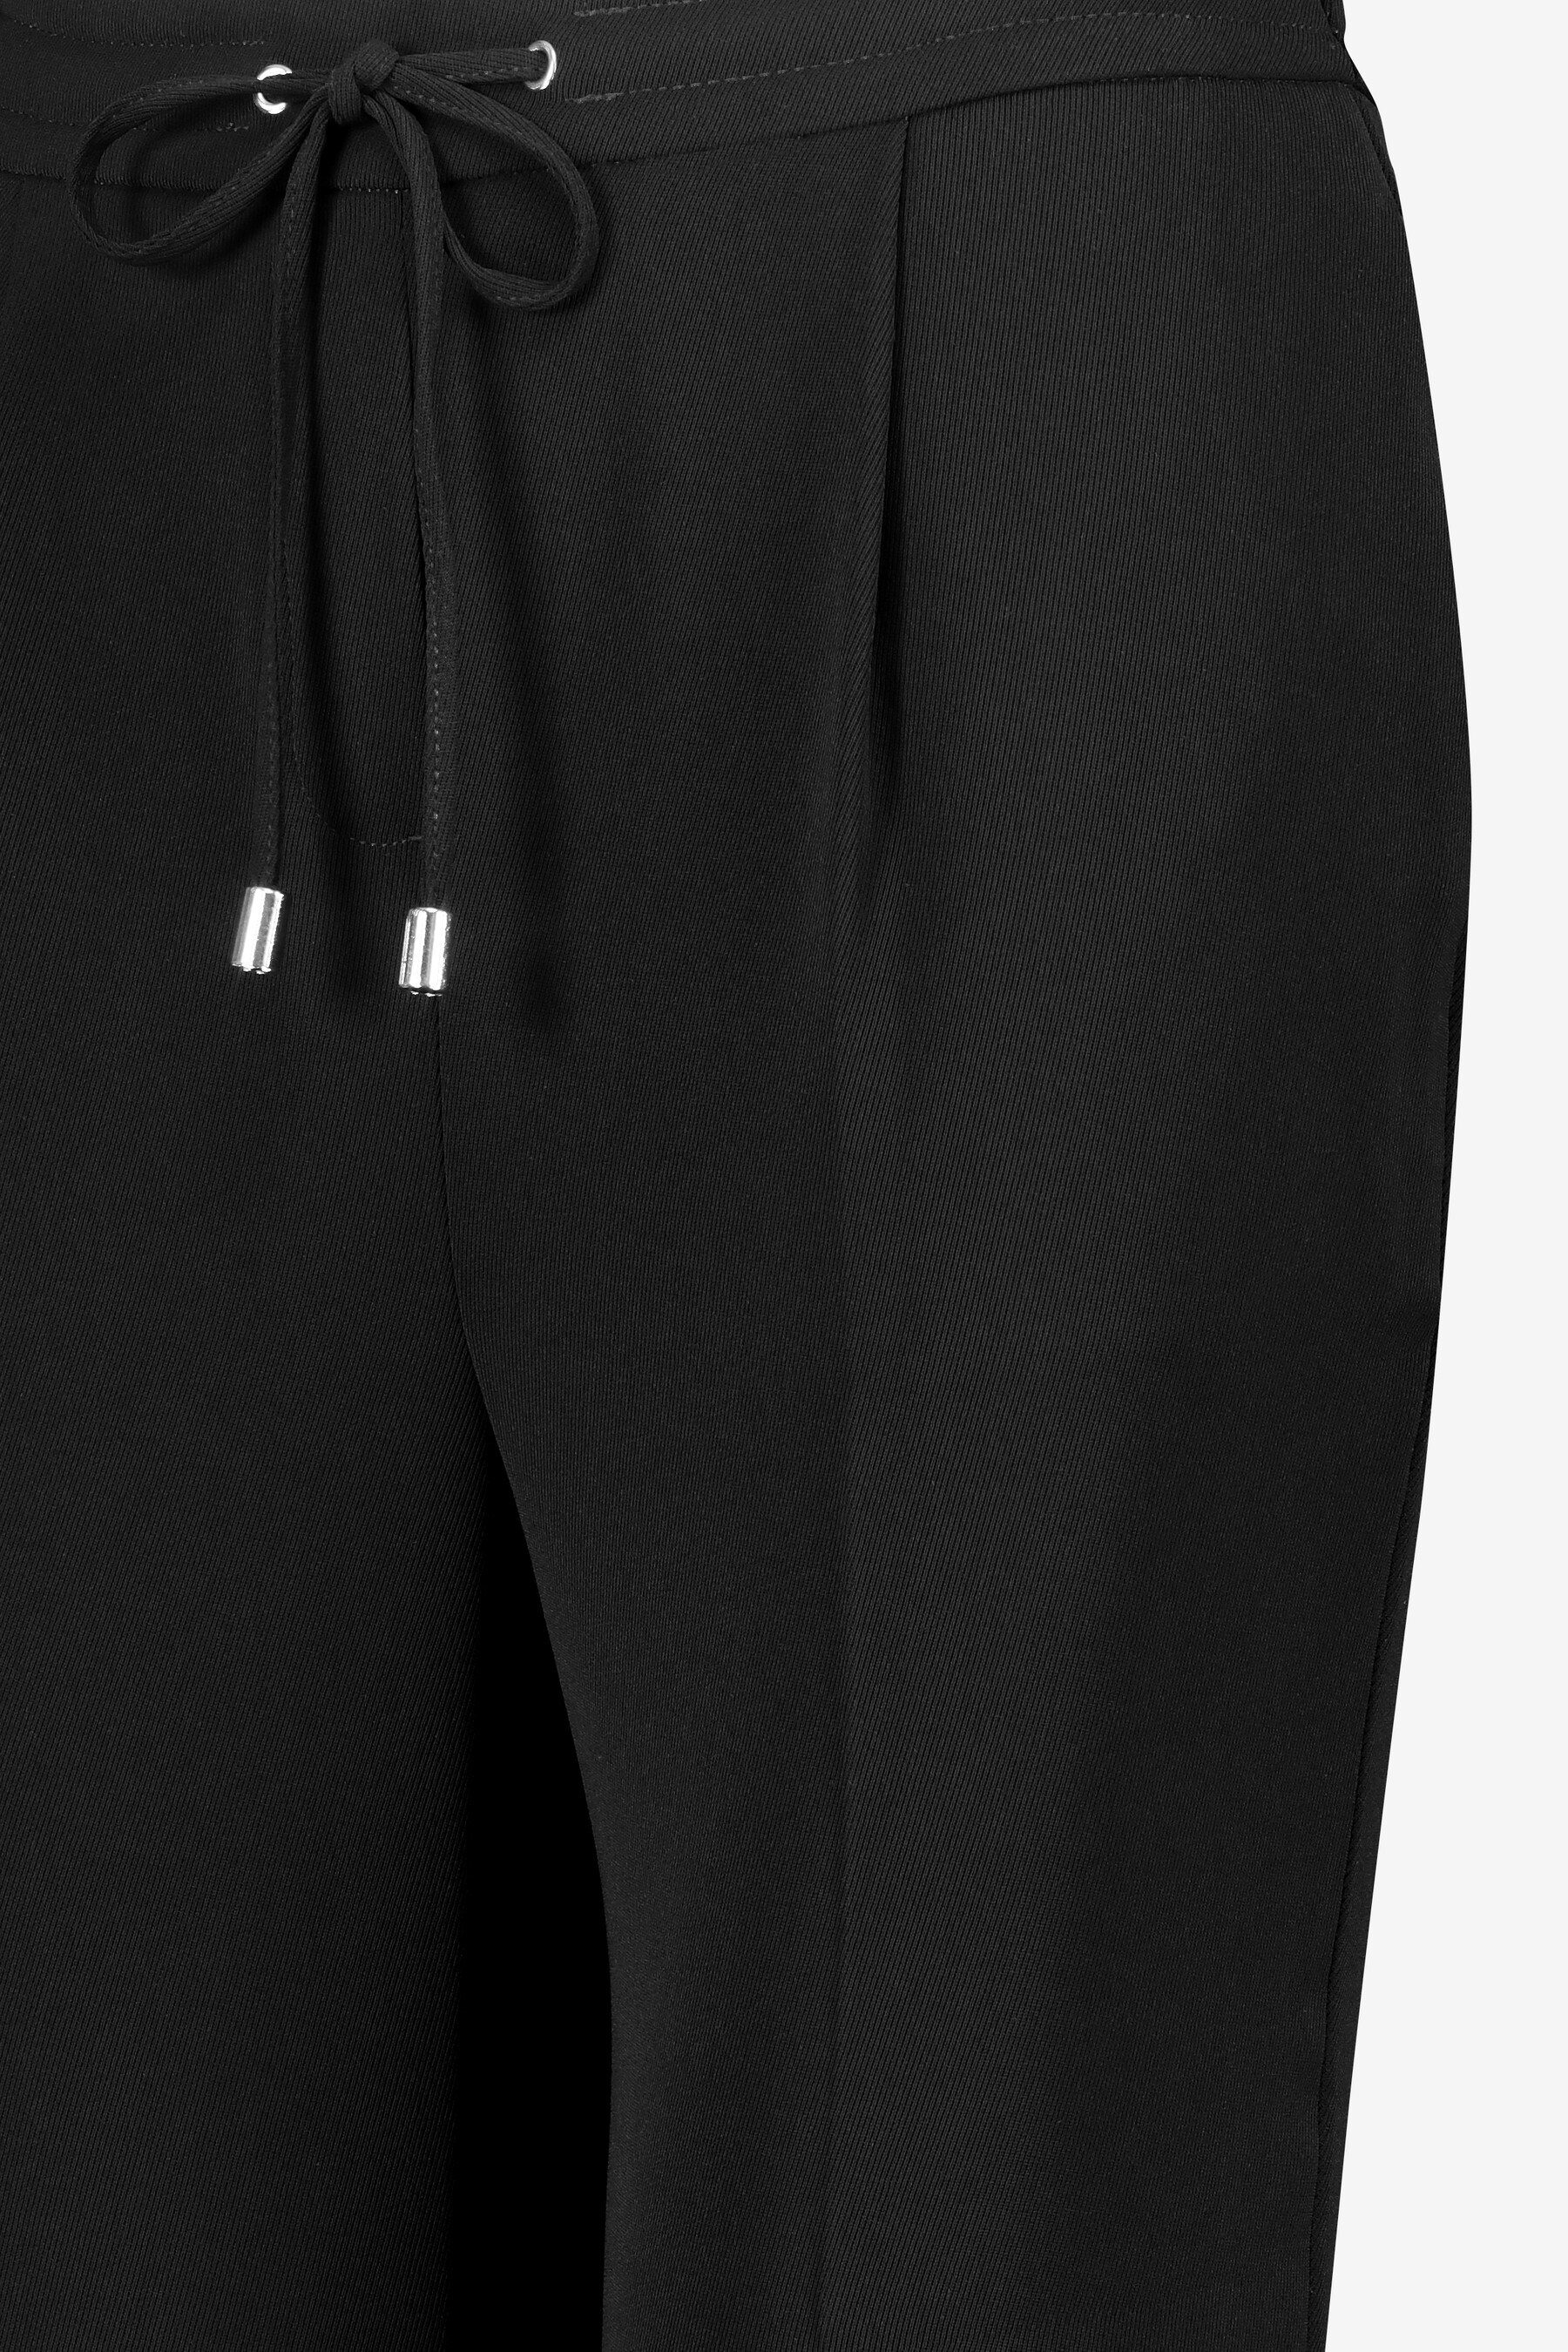 Buy Black Twill Formal Joggers from the Next UK online shop